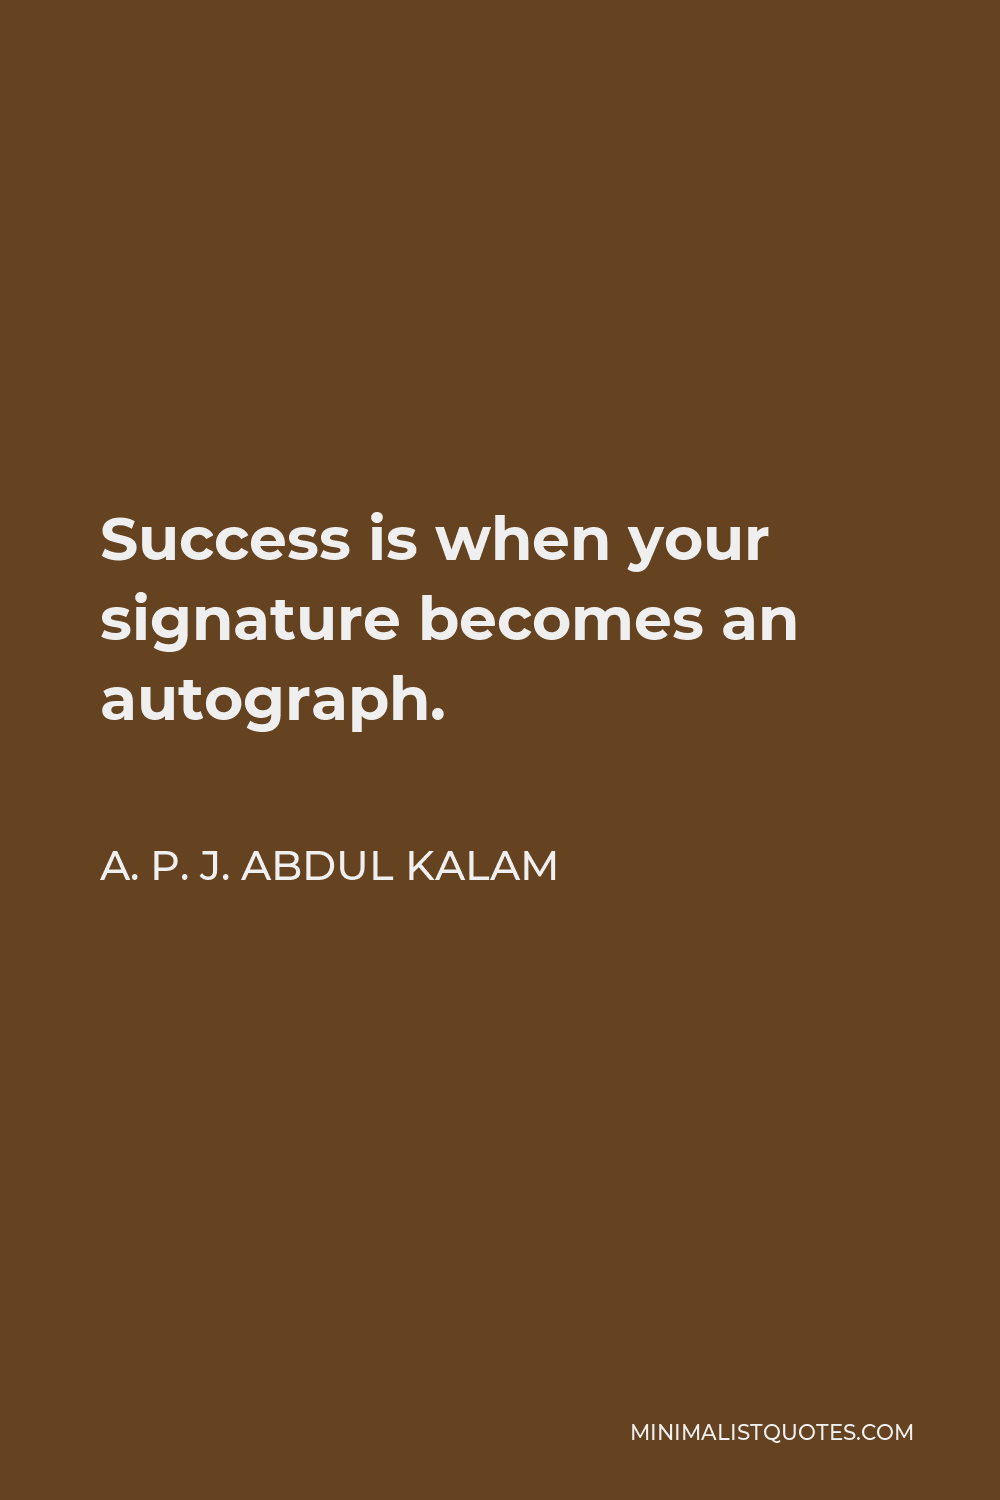 A. P. J. Abdul Kalam Quote - Success is when your signature becomes an autograph.